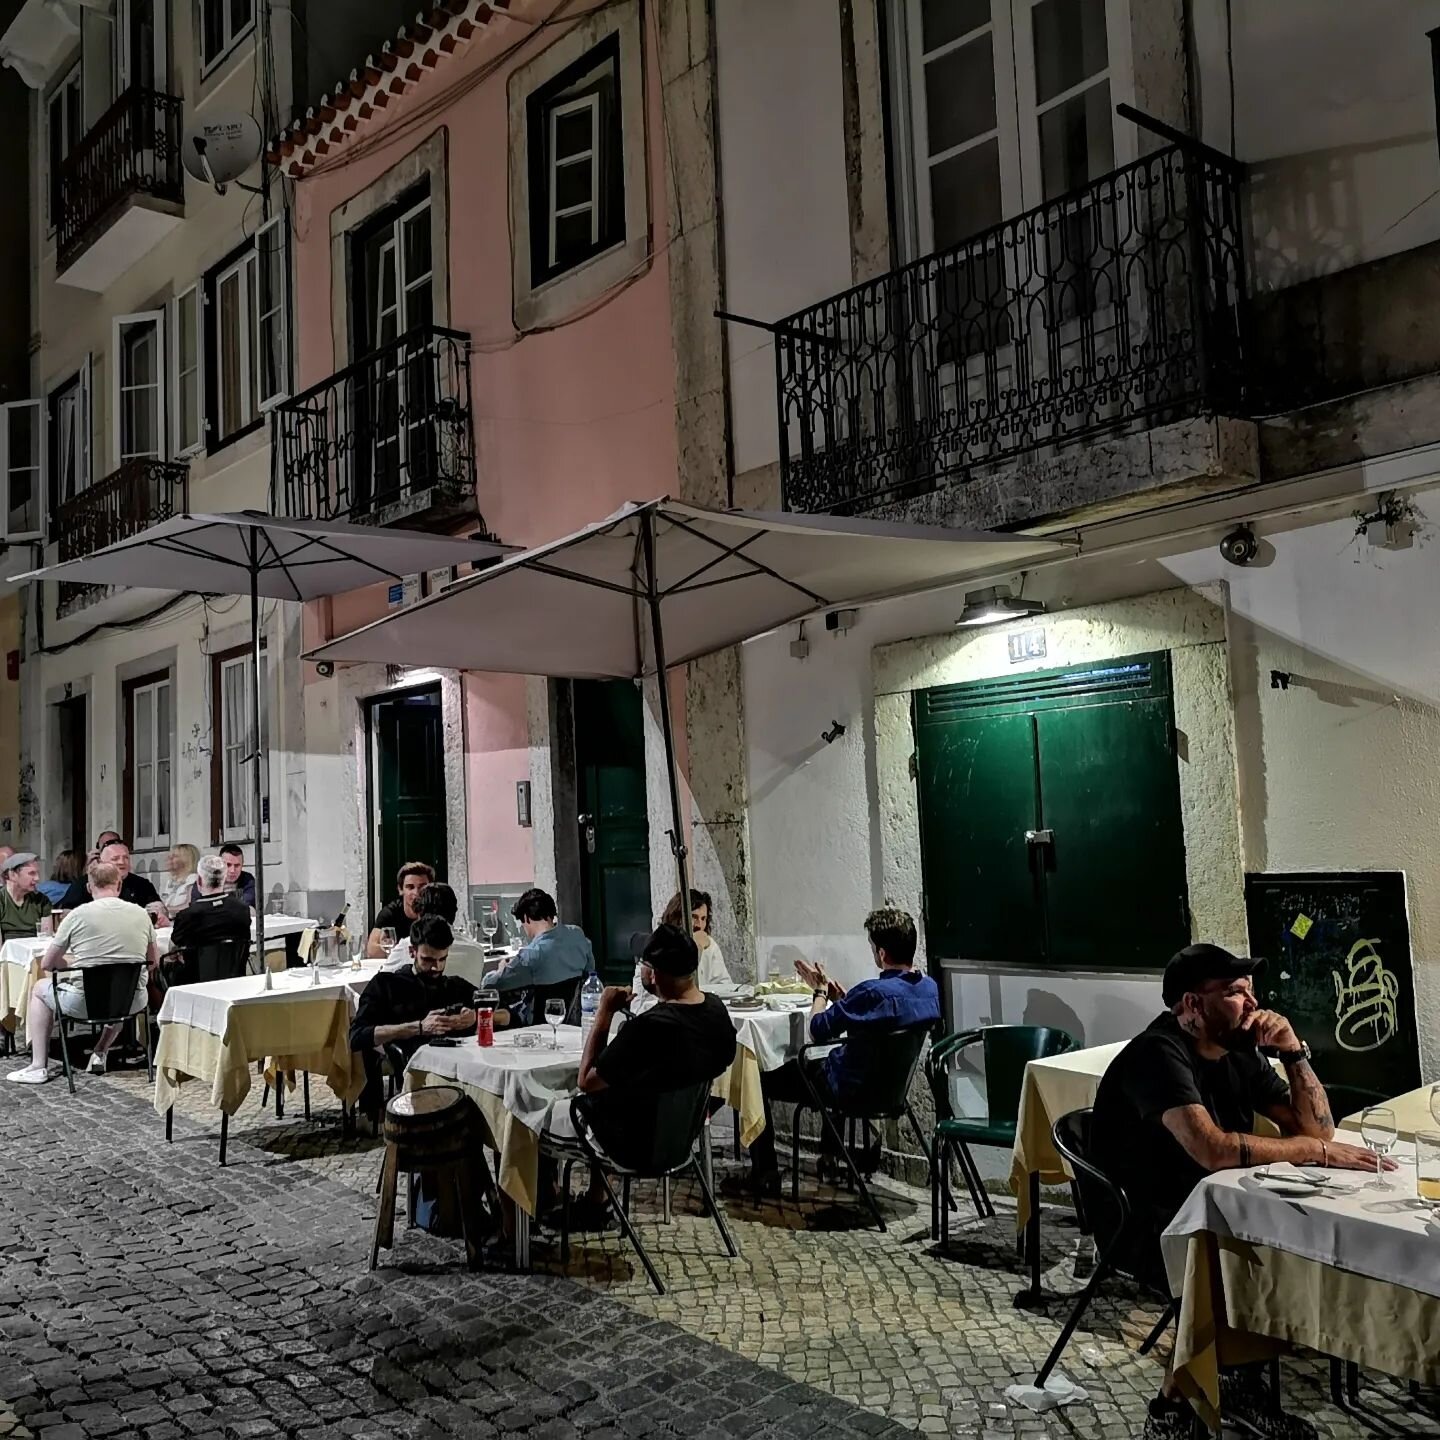 Arrived in Lisbon late last night. Friday night and there was a great energy on the streets of Bairro Altp as I checked into my hotel The Lumiares.
.
.
.
#luxurytravel #portugal #lisbon #weareemotions  #connectionsway #luxury #travel #foodie #foodand